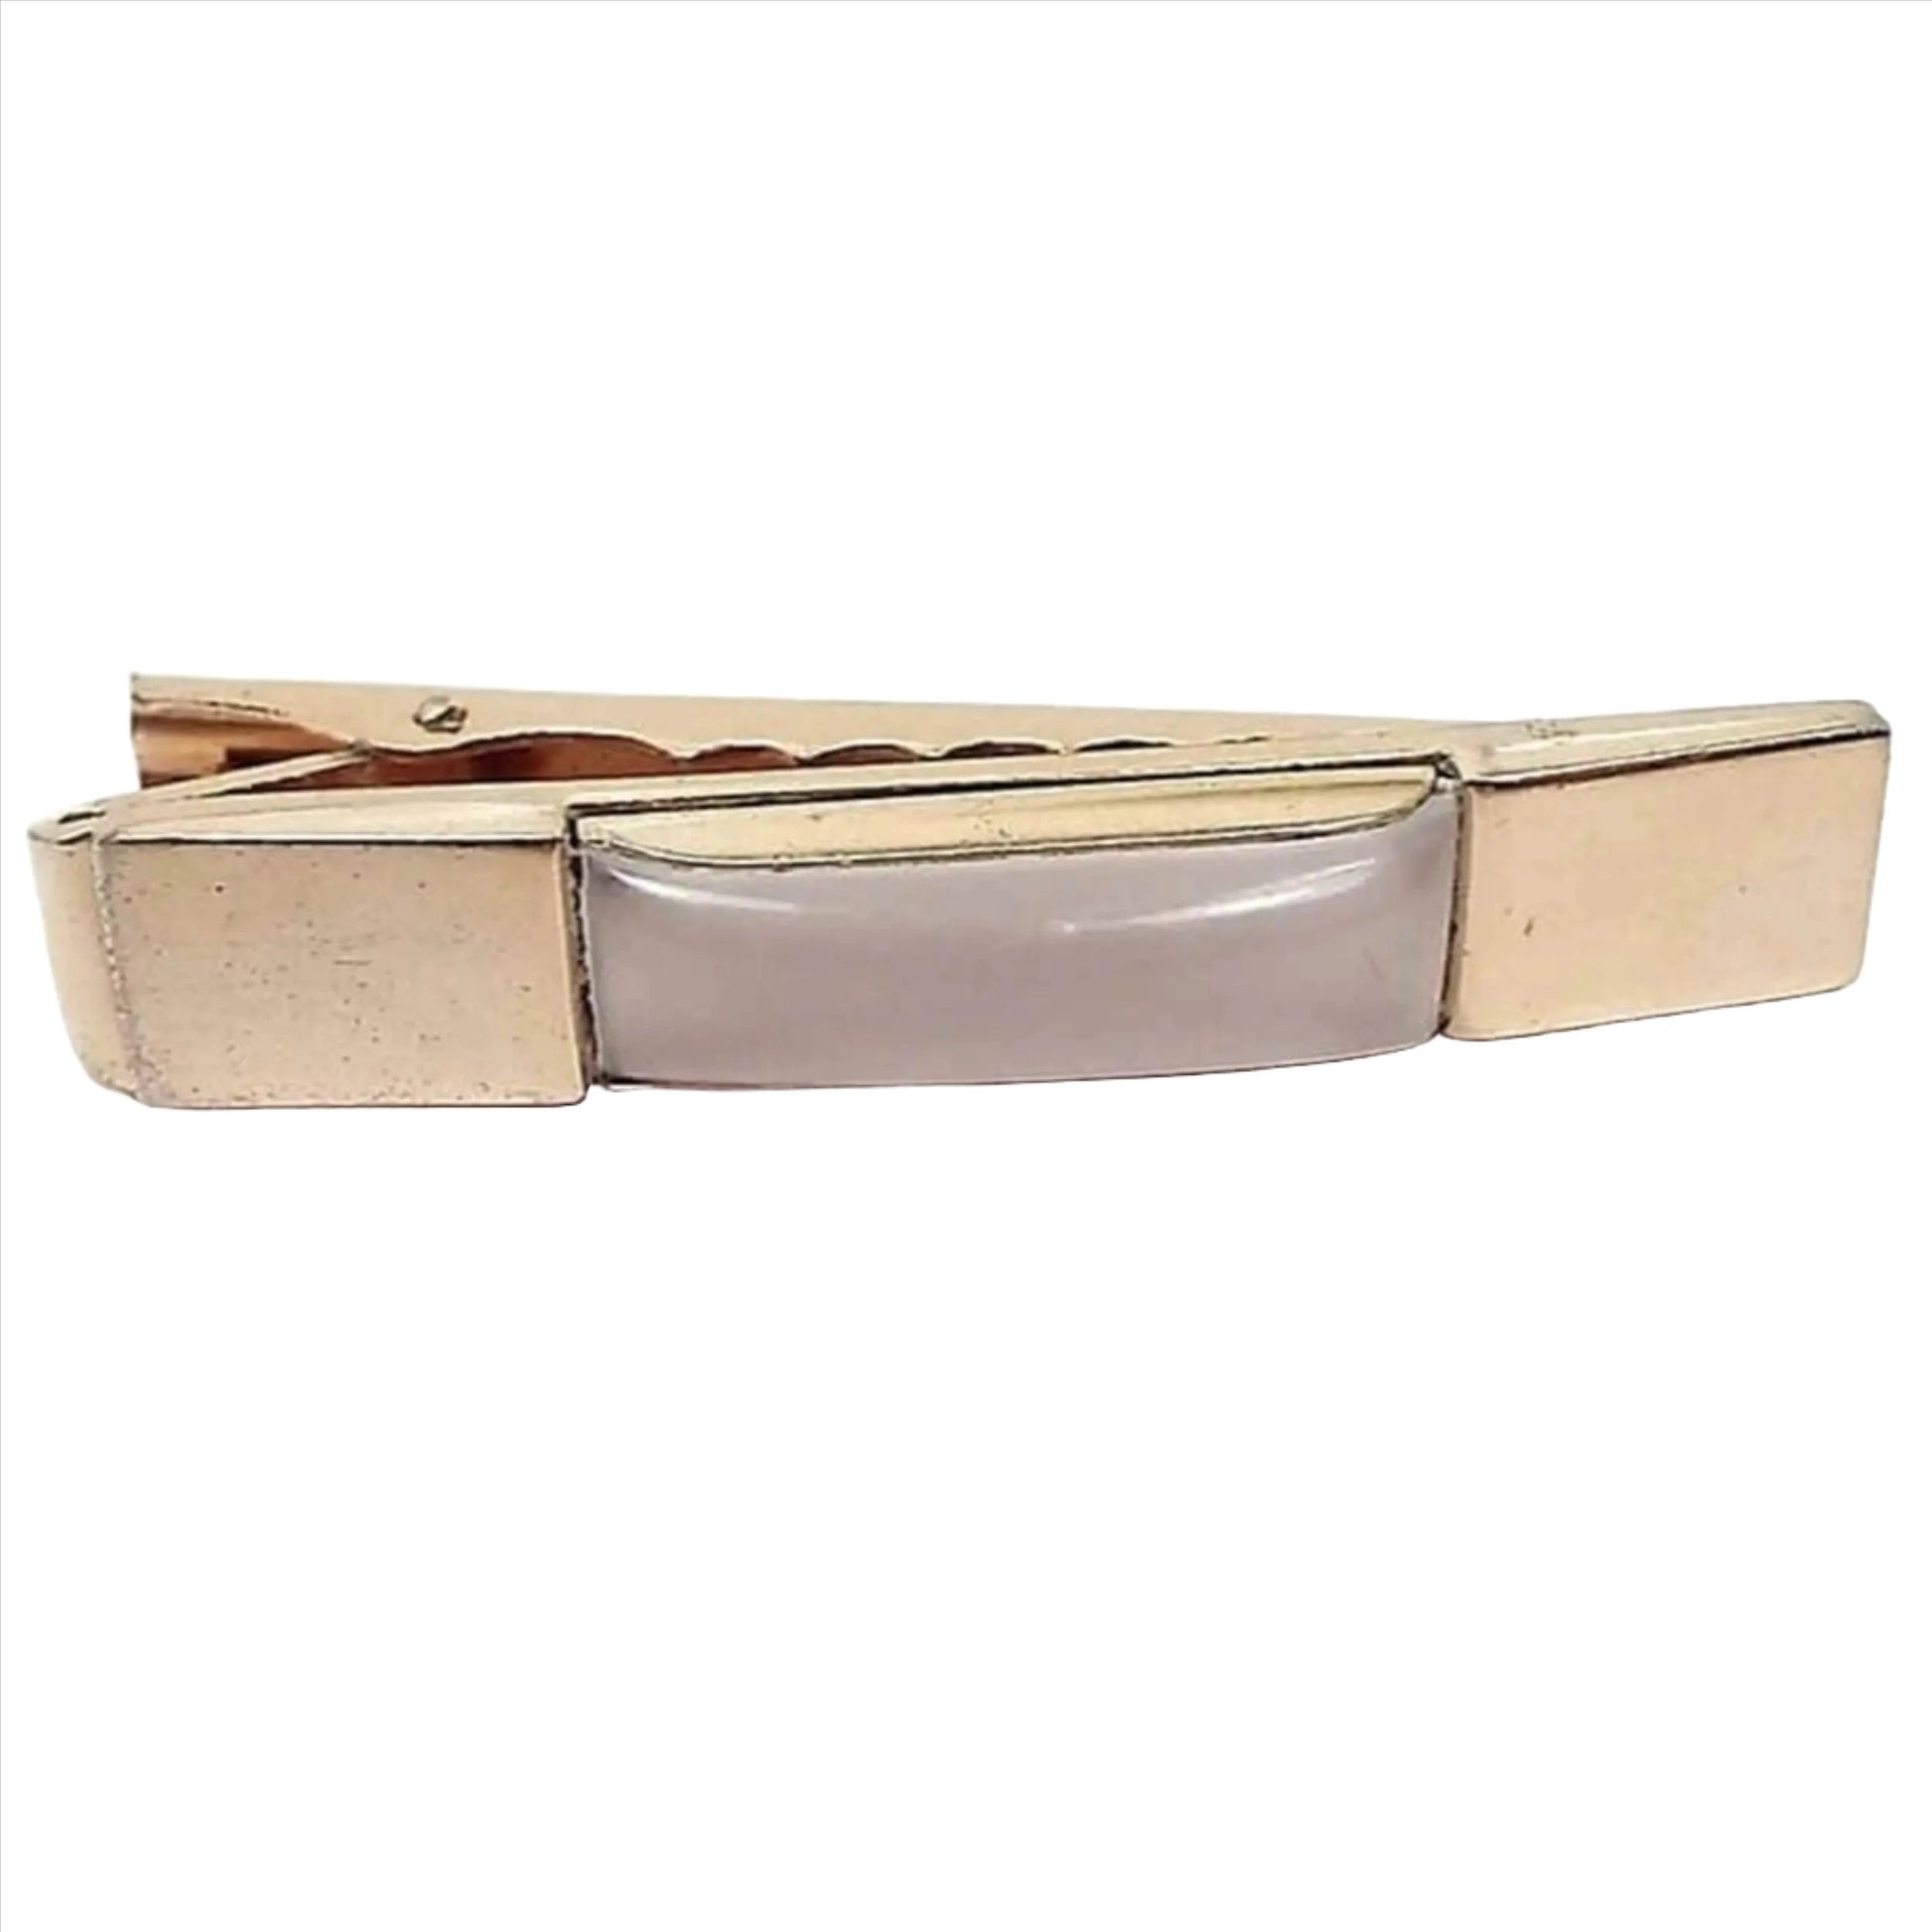 Front view of the Mid Century Anson tie clip. It has a rectangle shape with a puffy rectangle lucite plastic cab in the middle. The lucite is pearly white and slightly translucent in color. There is a large wide alligator style clip on the back.